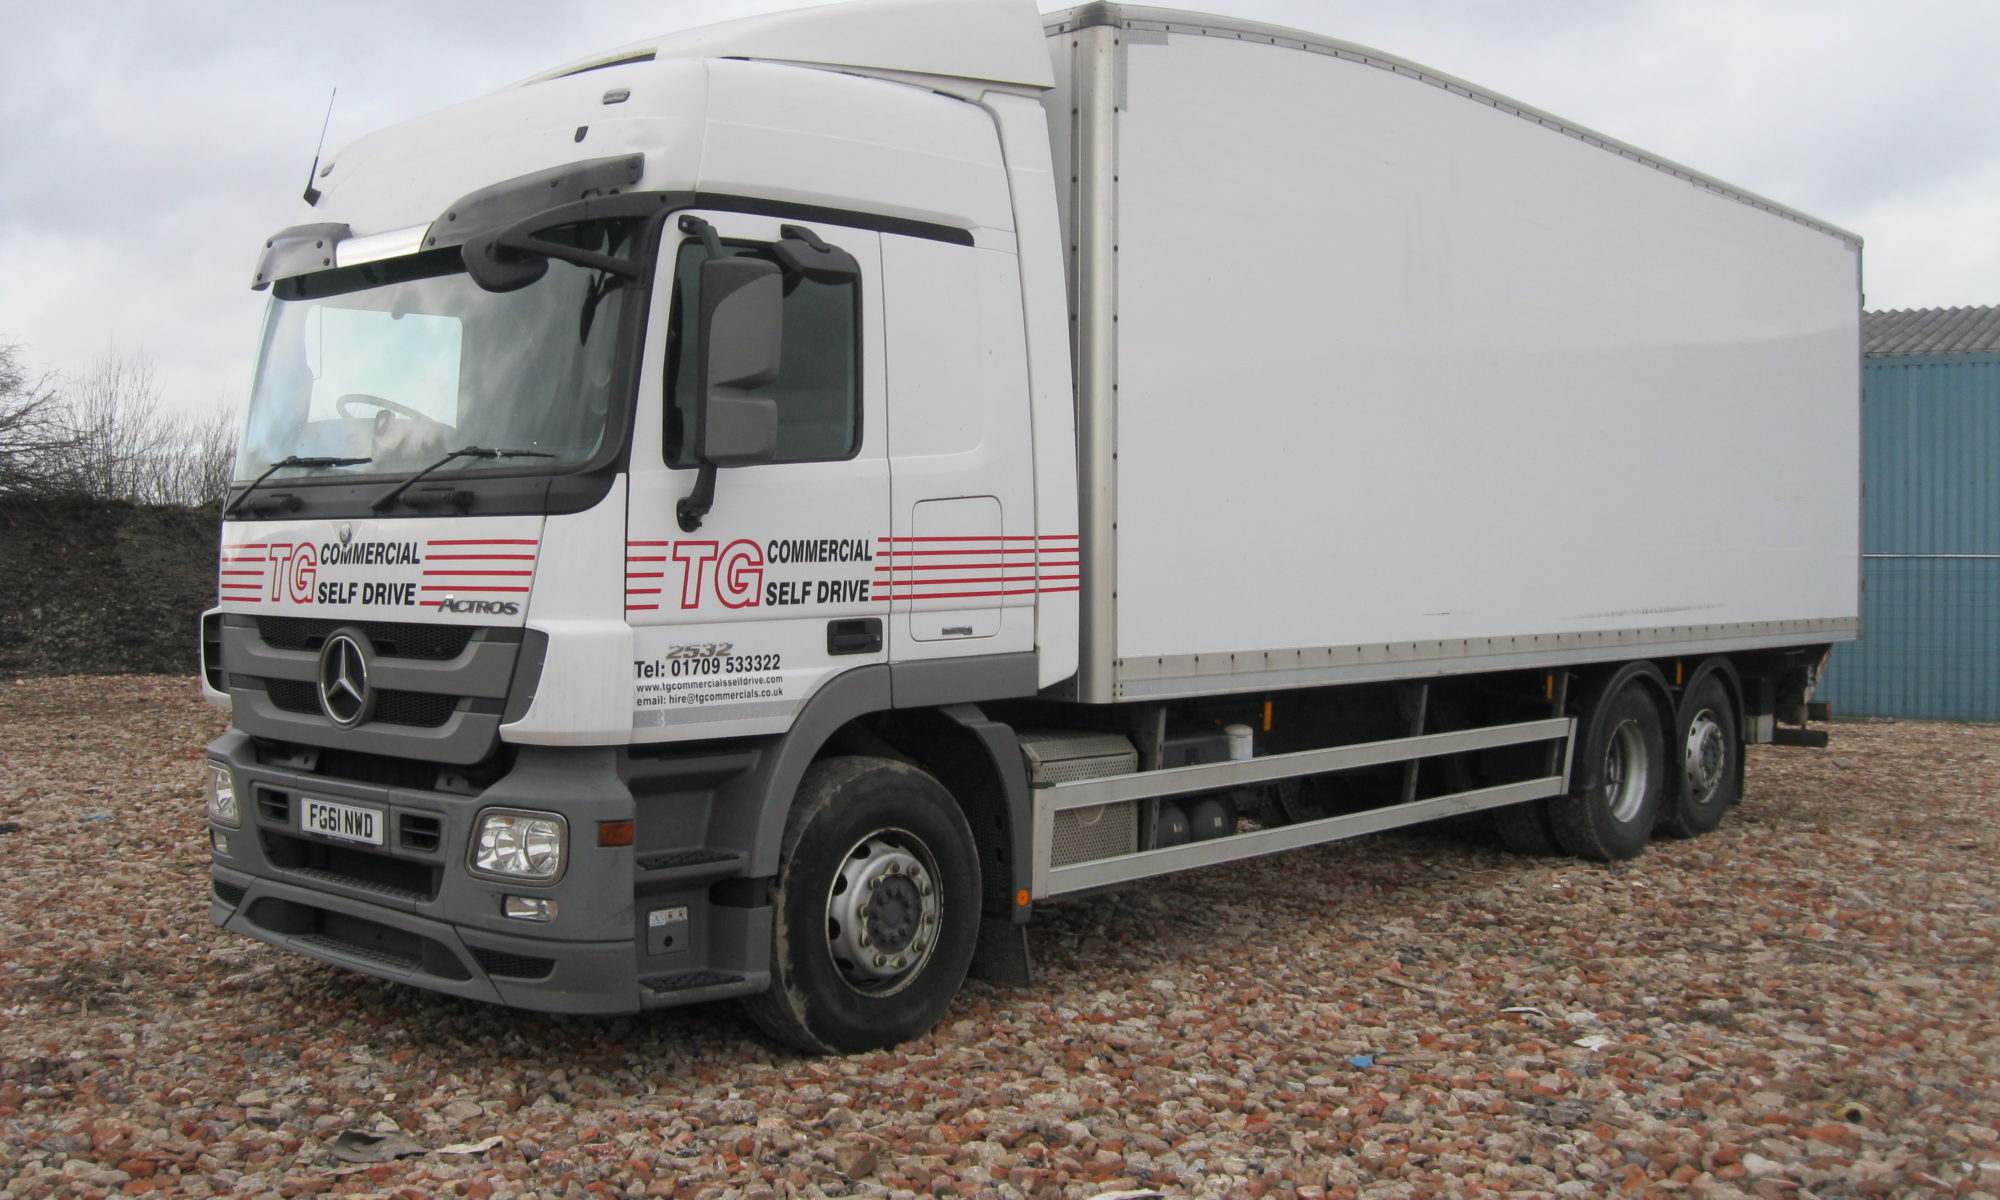 TG Commercials Self Drive Offers A Choice Of Tipper Trucks